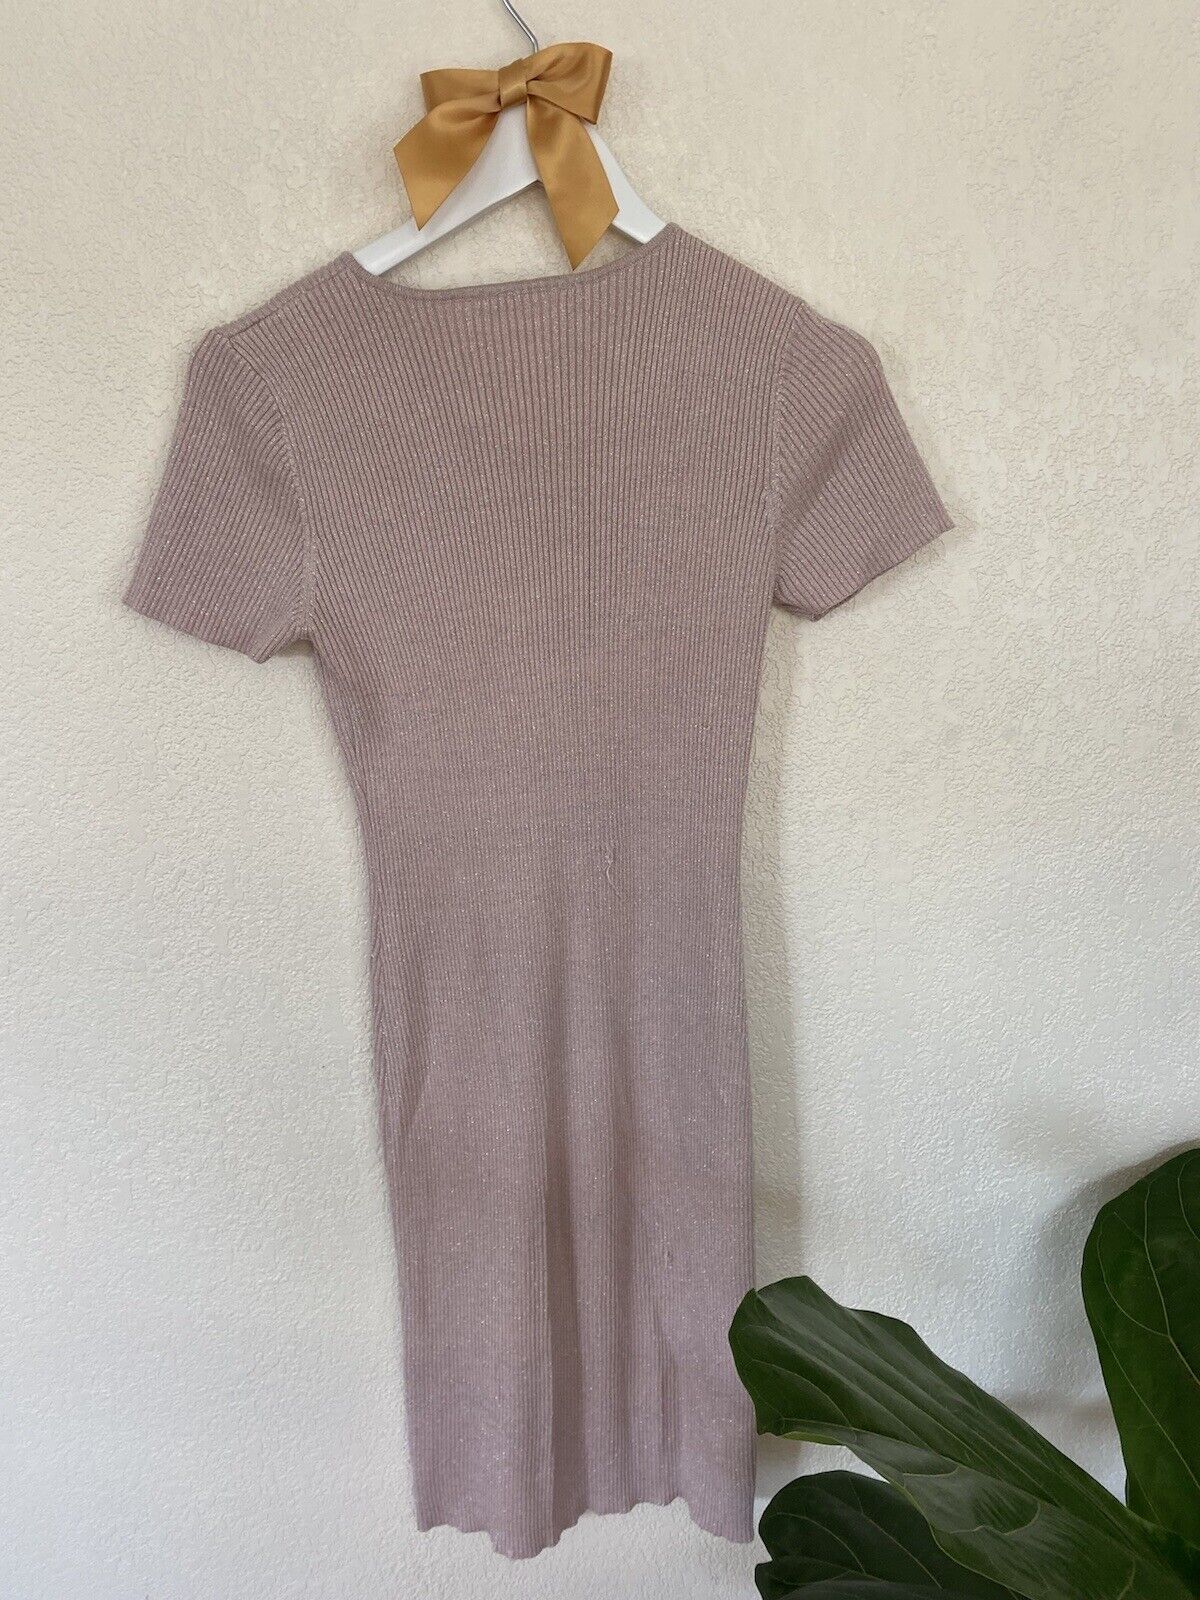 Y2K Dusty Pink Sparkly Midi Dress - Unbranded - Women's Large